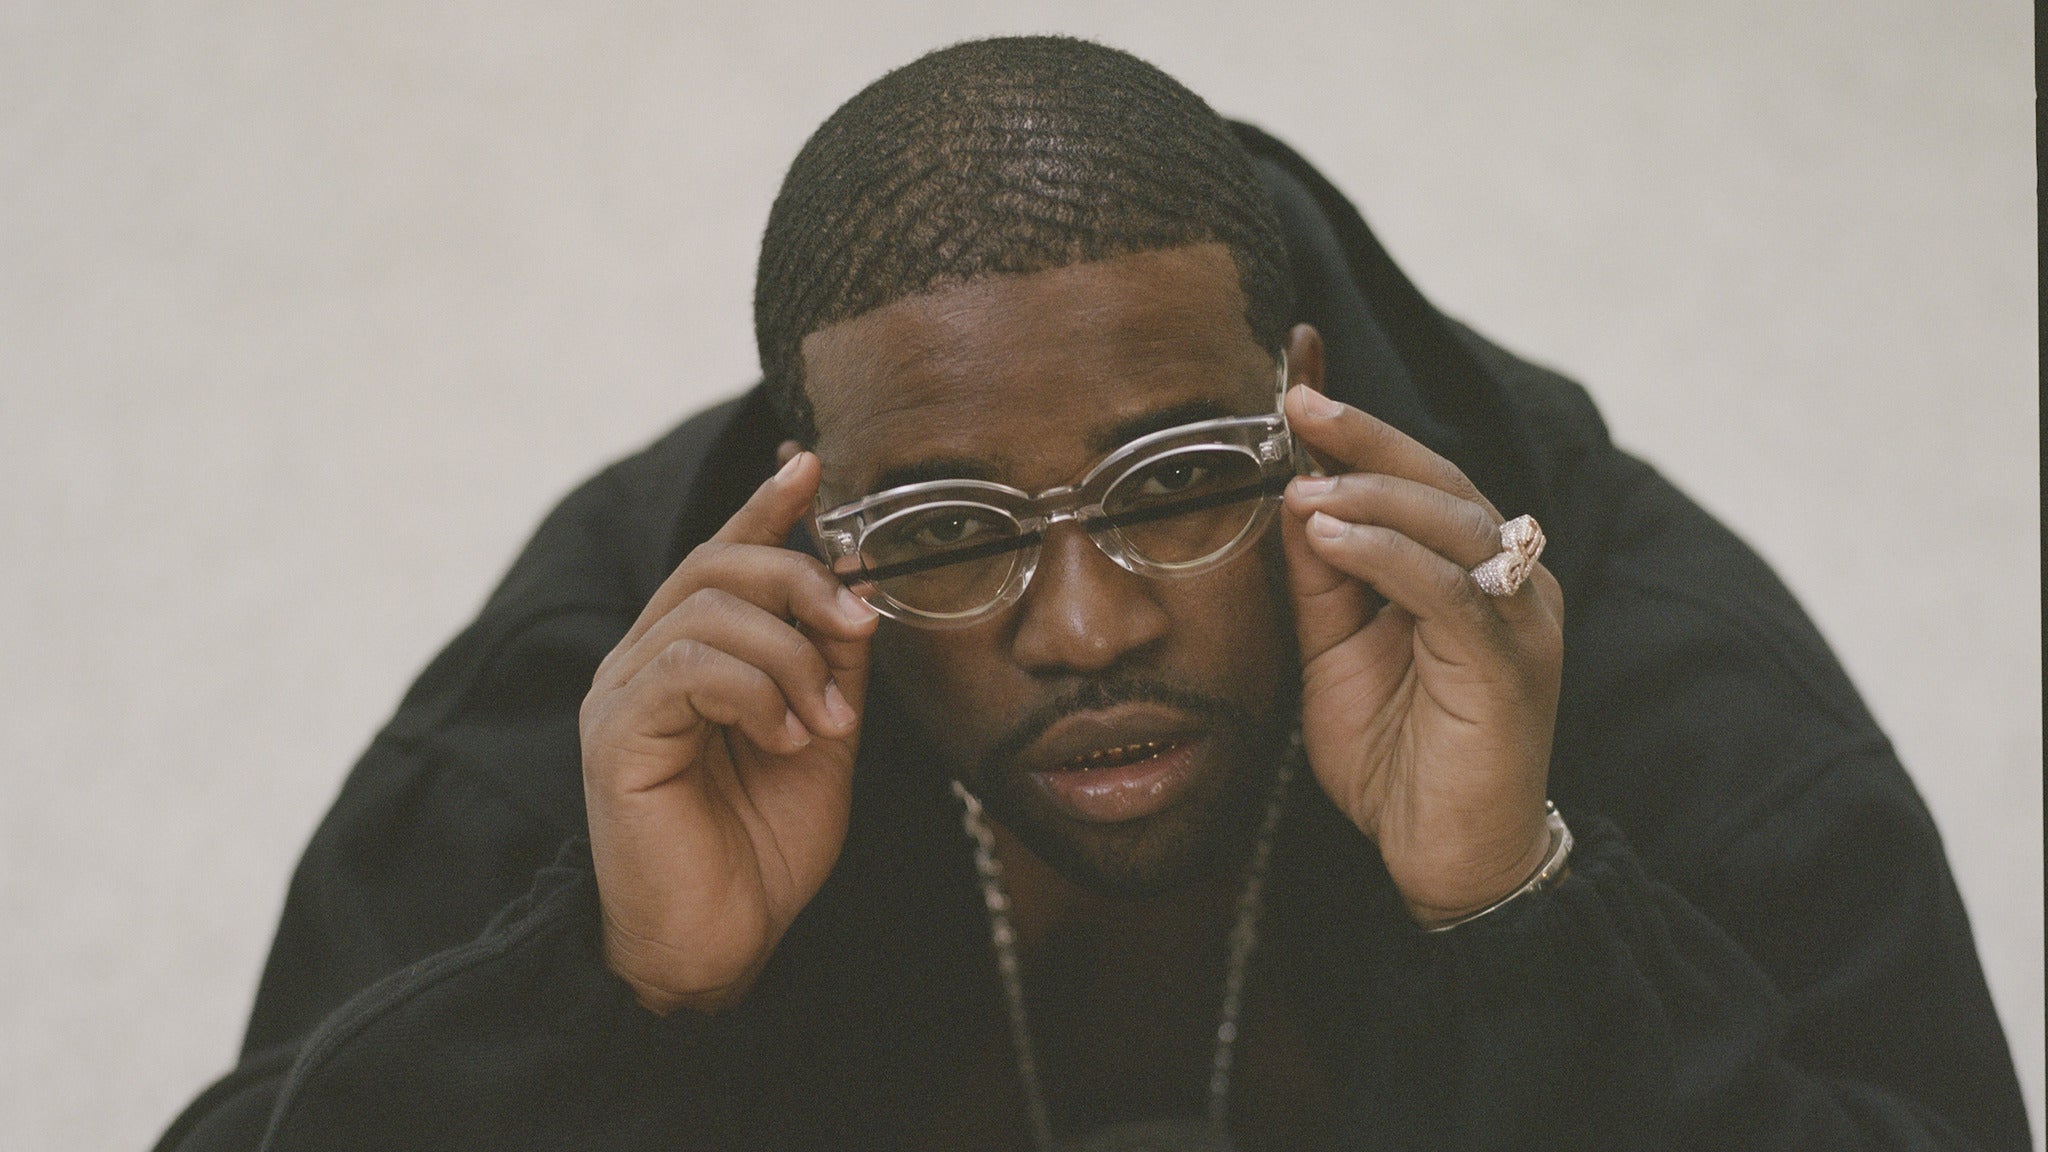 FERG presents Mad Man Tour in Indianapolis promo photo for Ticketmaster presale offer code